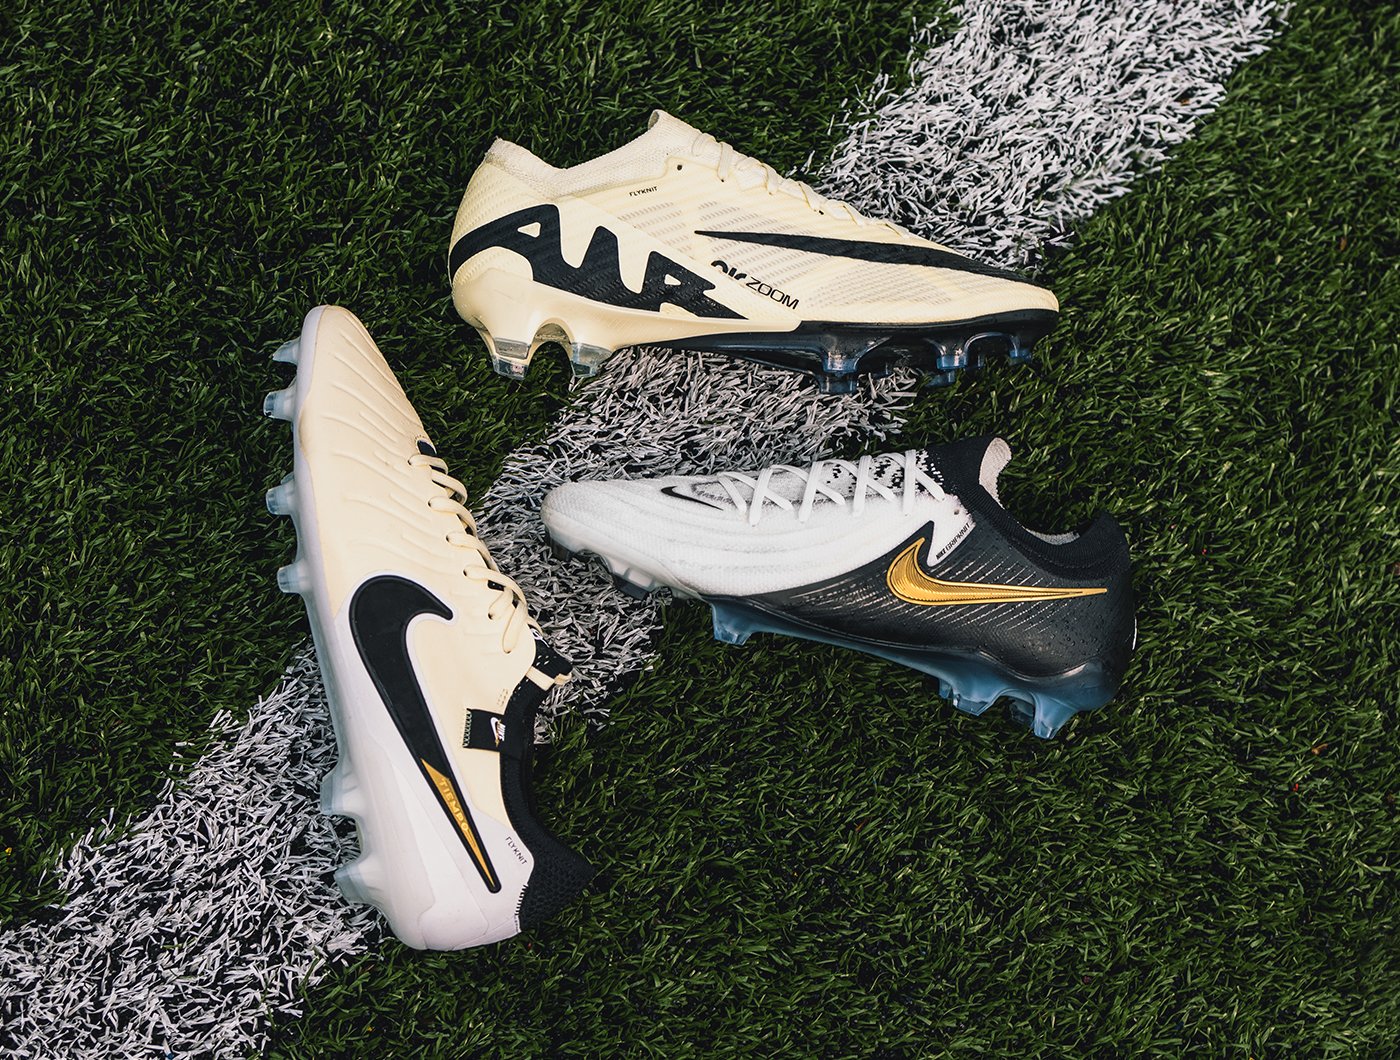 Nike Rugby Boots